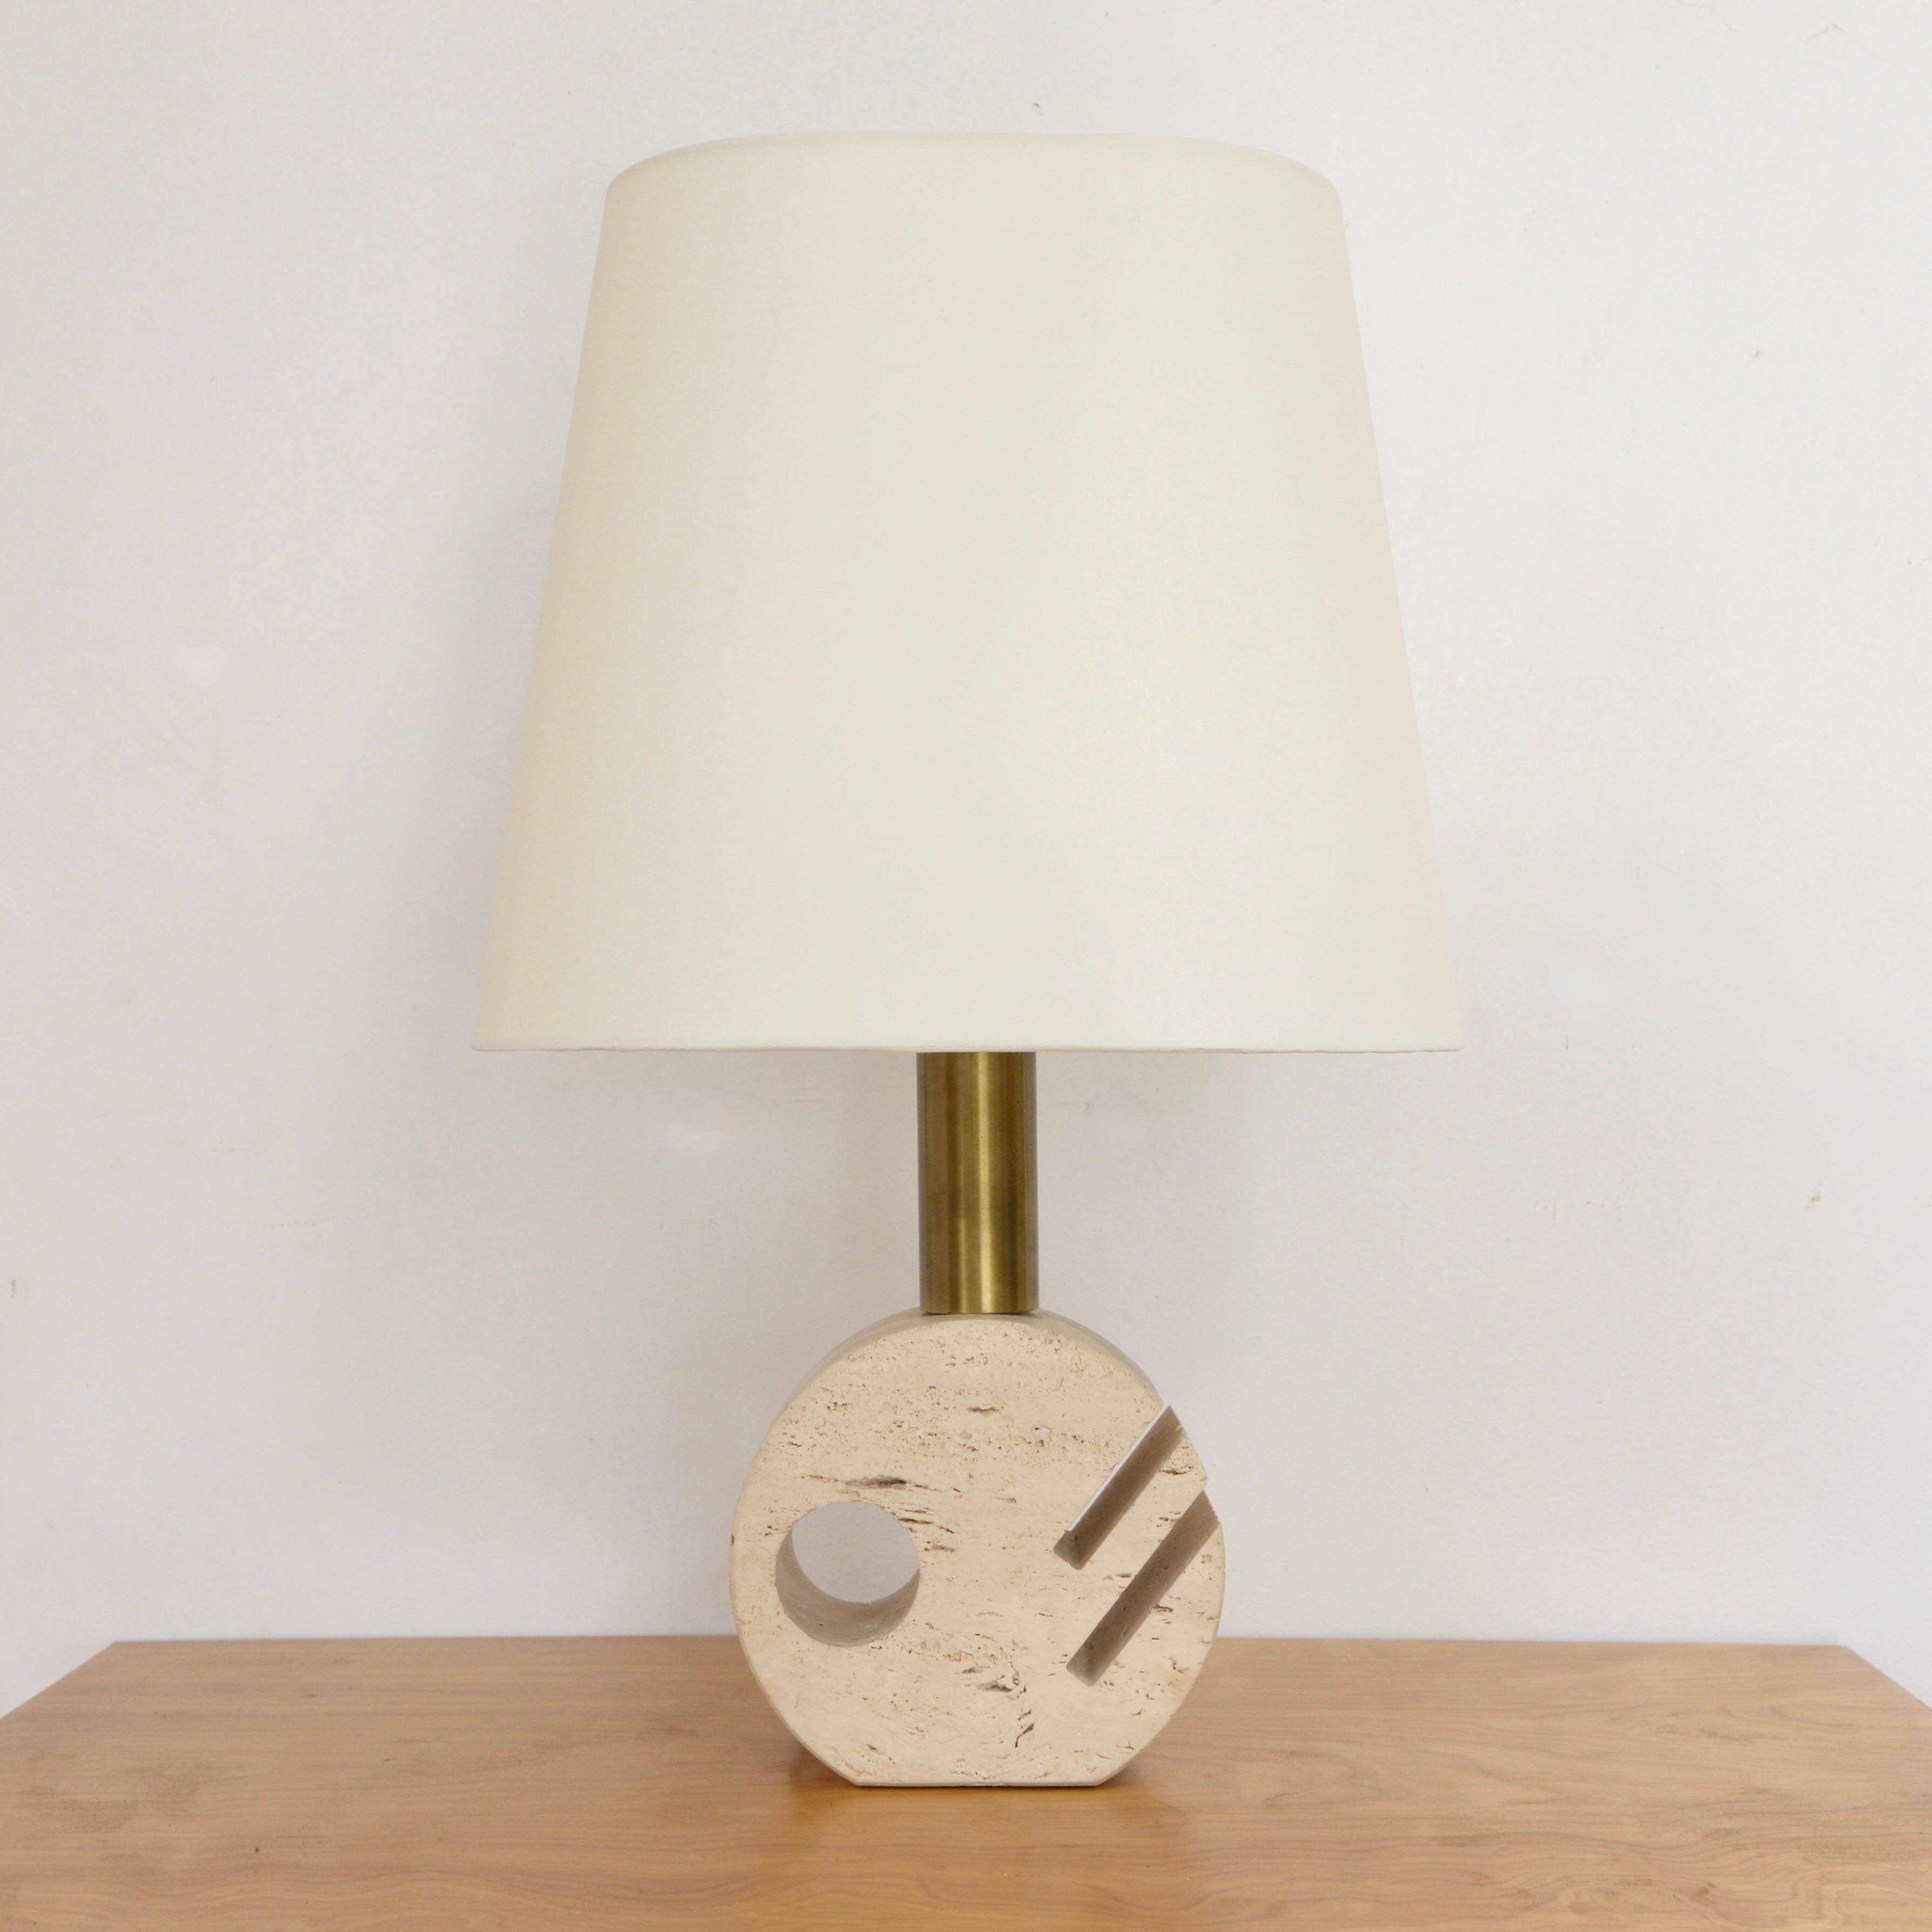 Vintage carved Italian circular travertine table lamp from the 1950s. Restored and fully rewired with a single E26 medium based socket, ready to be used in the USA. Lightbulbs included with order. 
Measurements:
Height: 26”
Shade diameter: